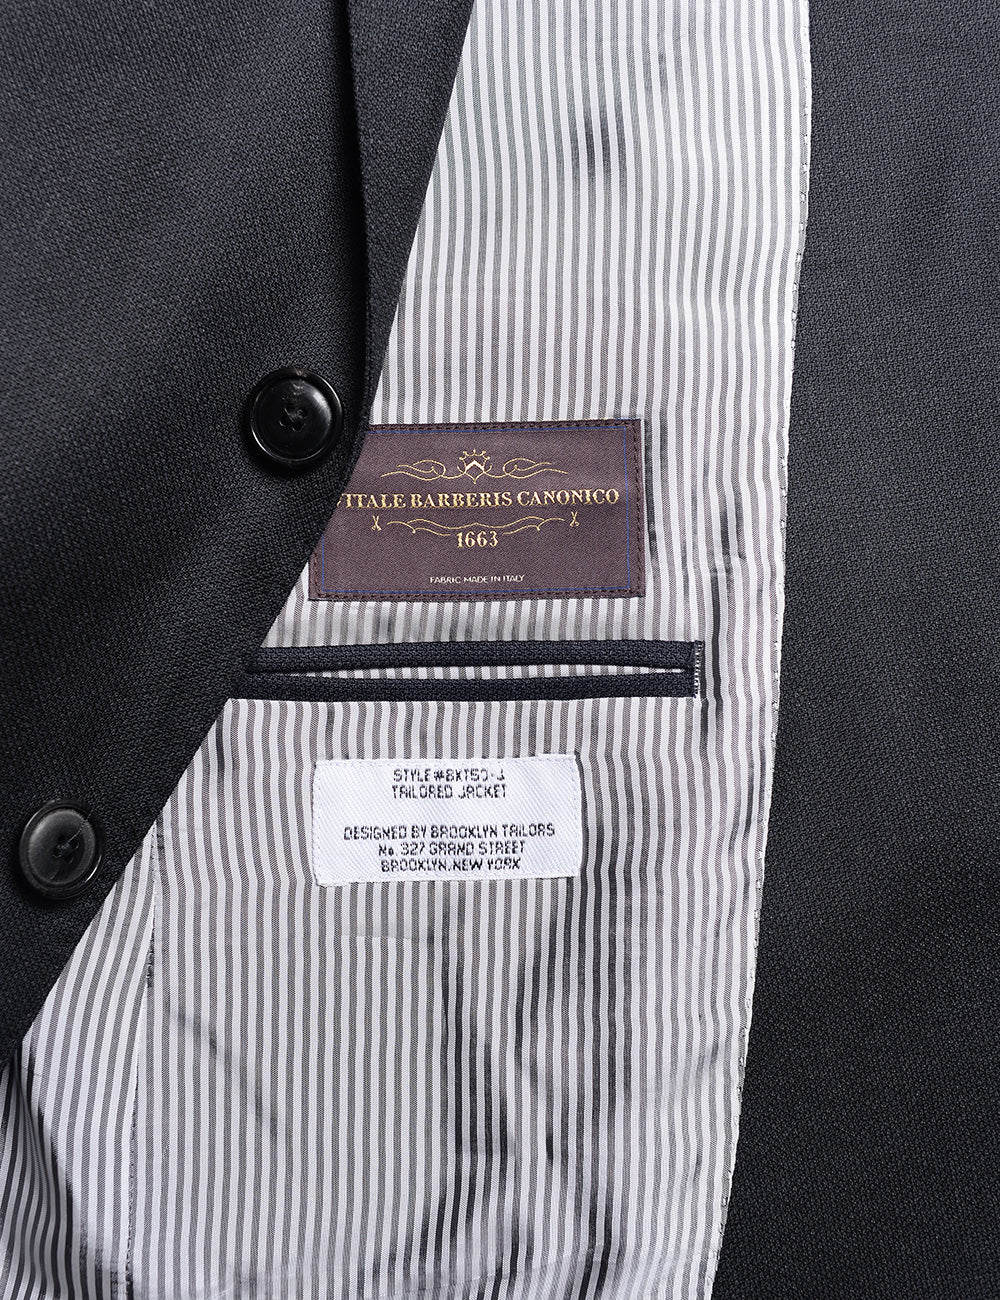 Detail of BKT50 Tailored Jacket in Birdseye Weave - Black showing lining and labeling